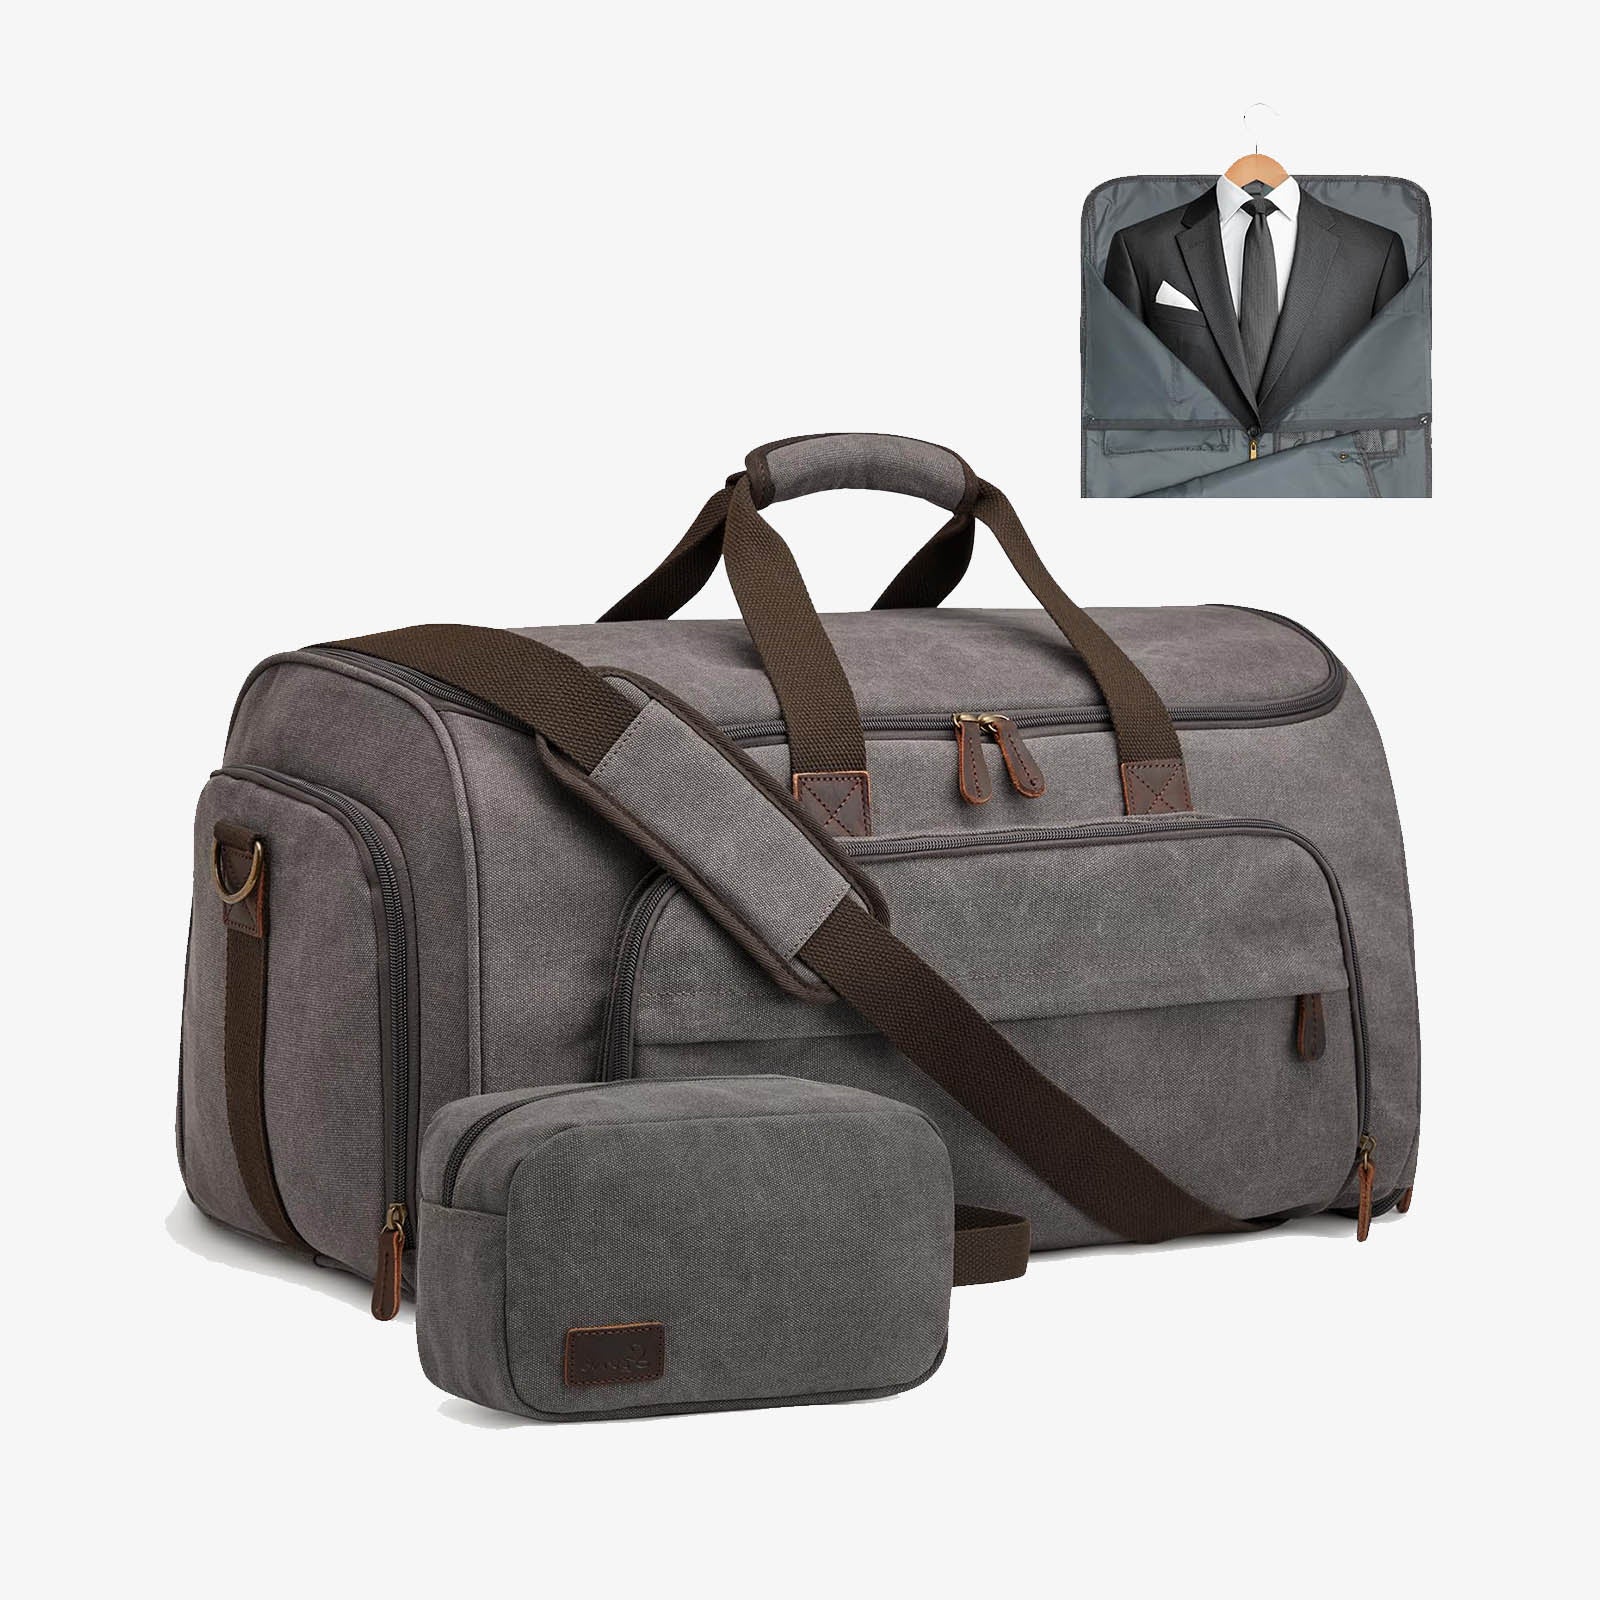 In Review: The $47 Waxed Canvas S-Zone Duffel Bag